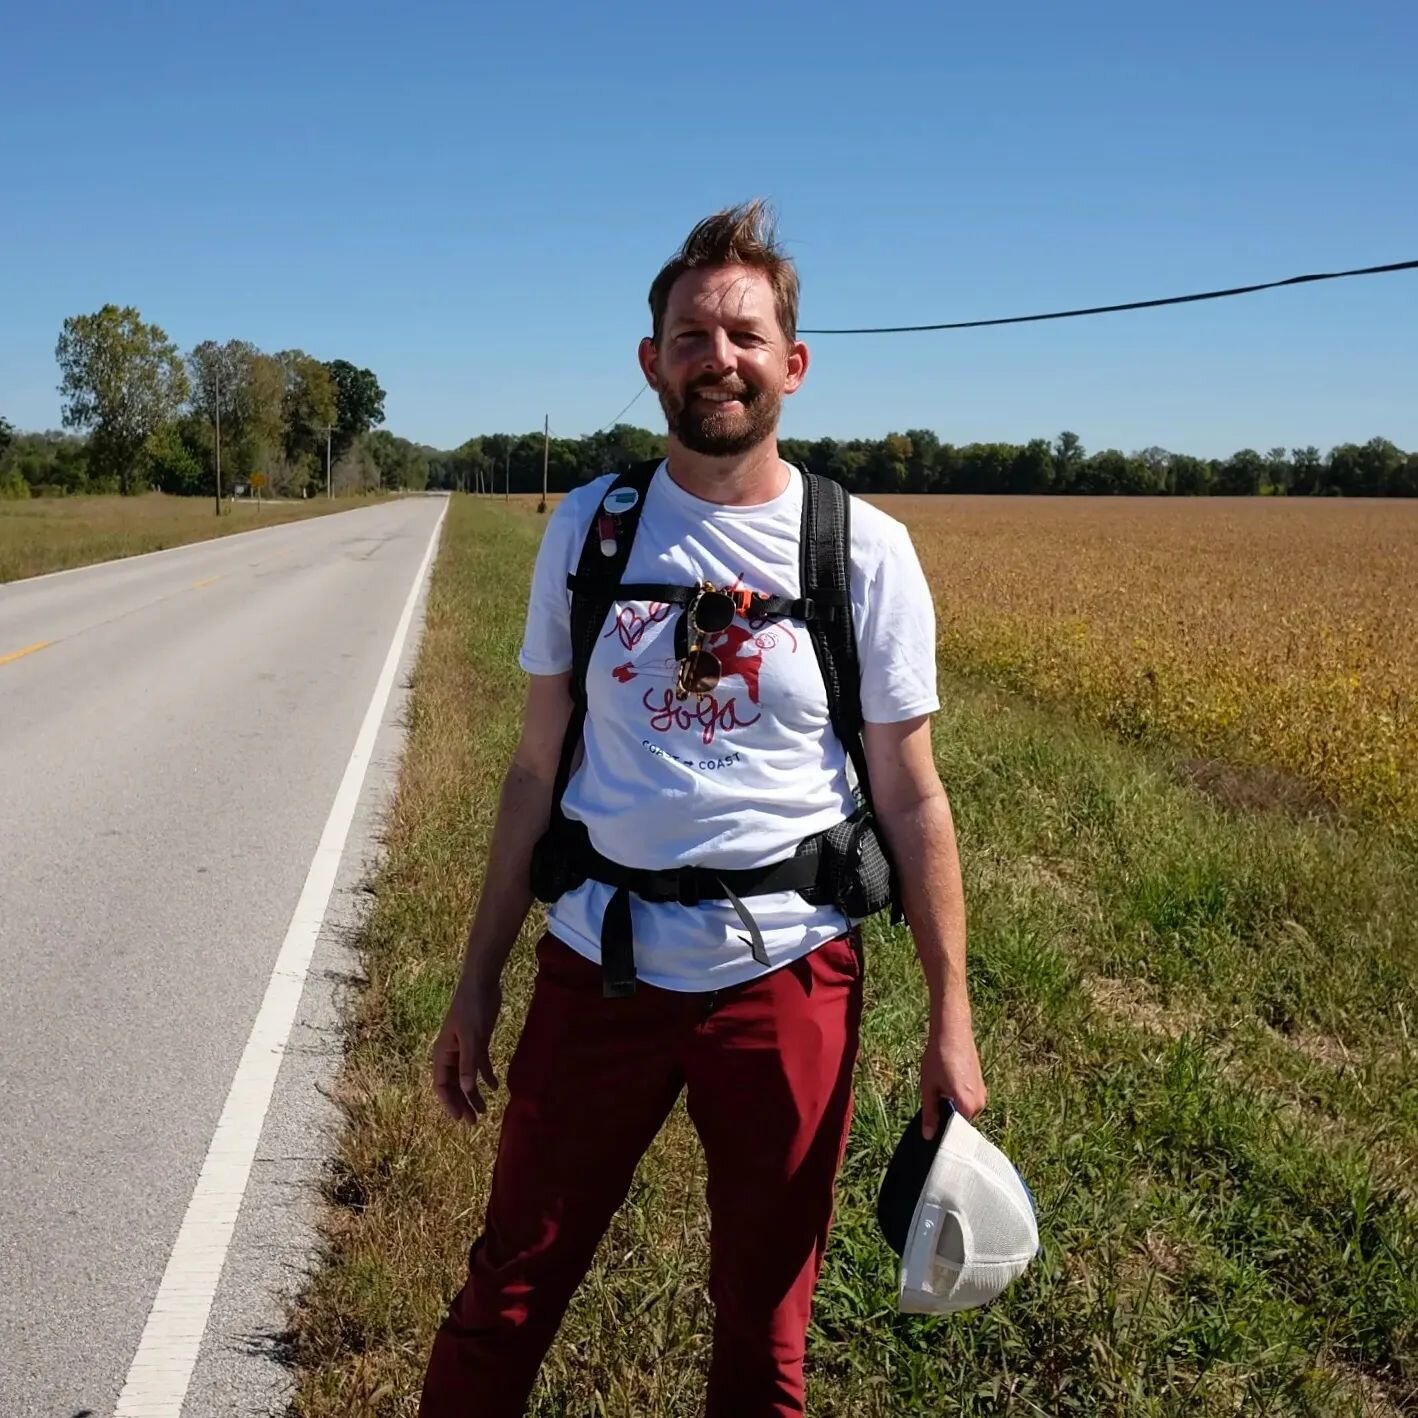 It's done. I've walked 100 miles in all 50 states. The last walking day was 13 miles on a glorious sunny fall Sunday in Illinois where the Mississippi and Illinois rivers come together. I had friends and family join in with @travelingtorimcd at my si